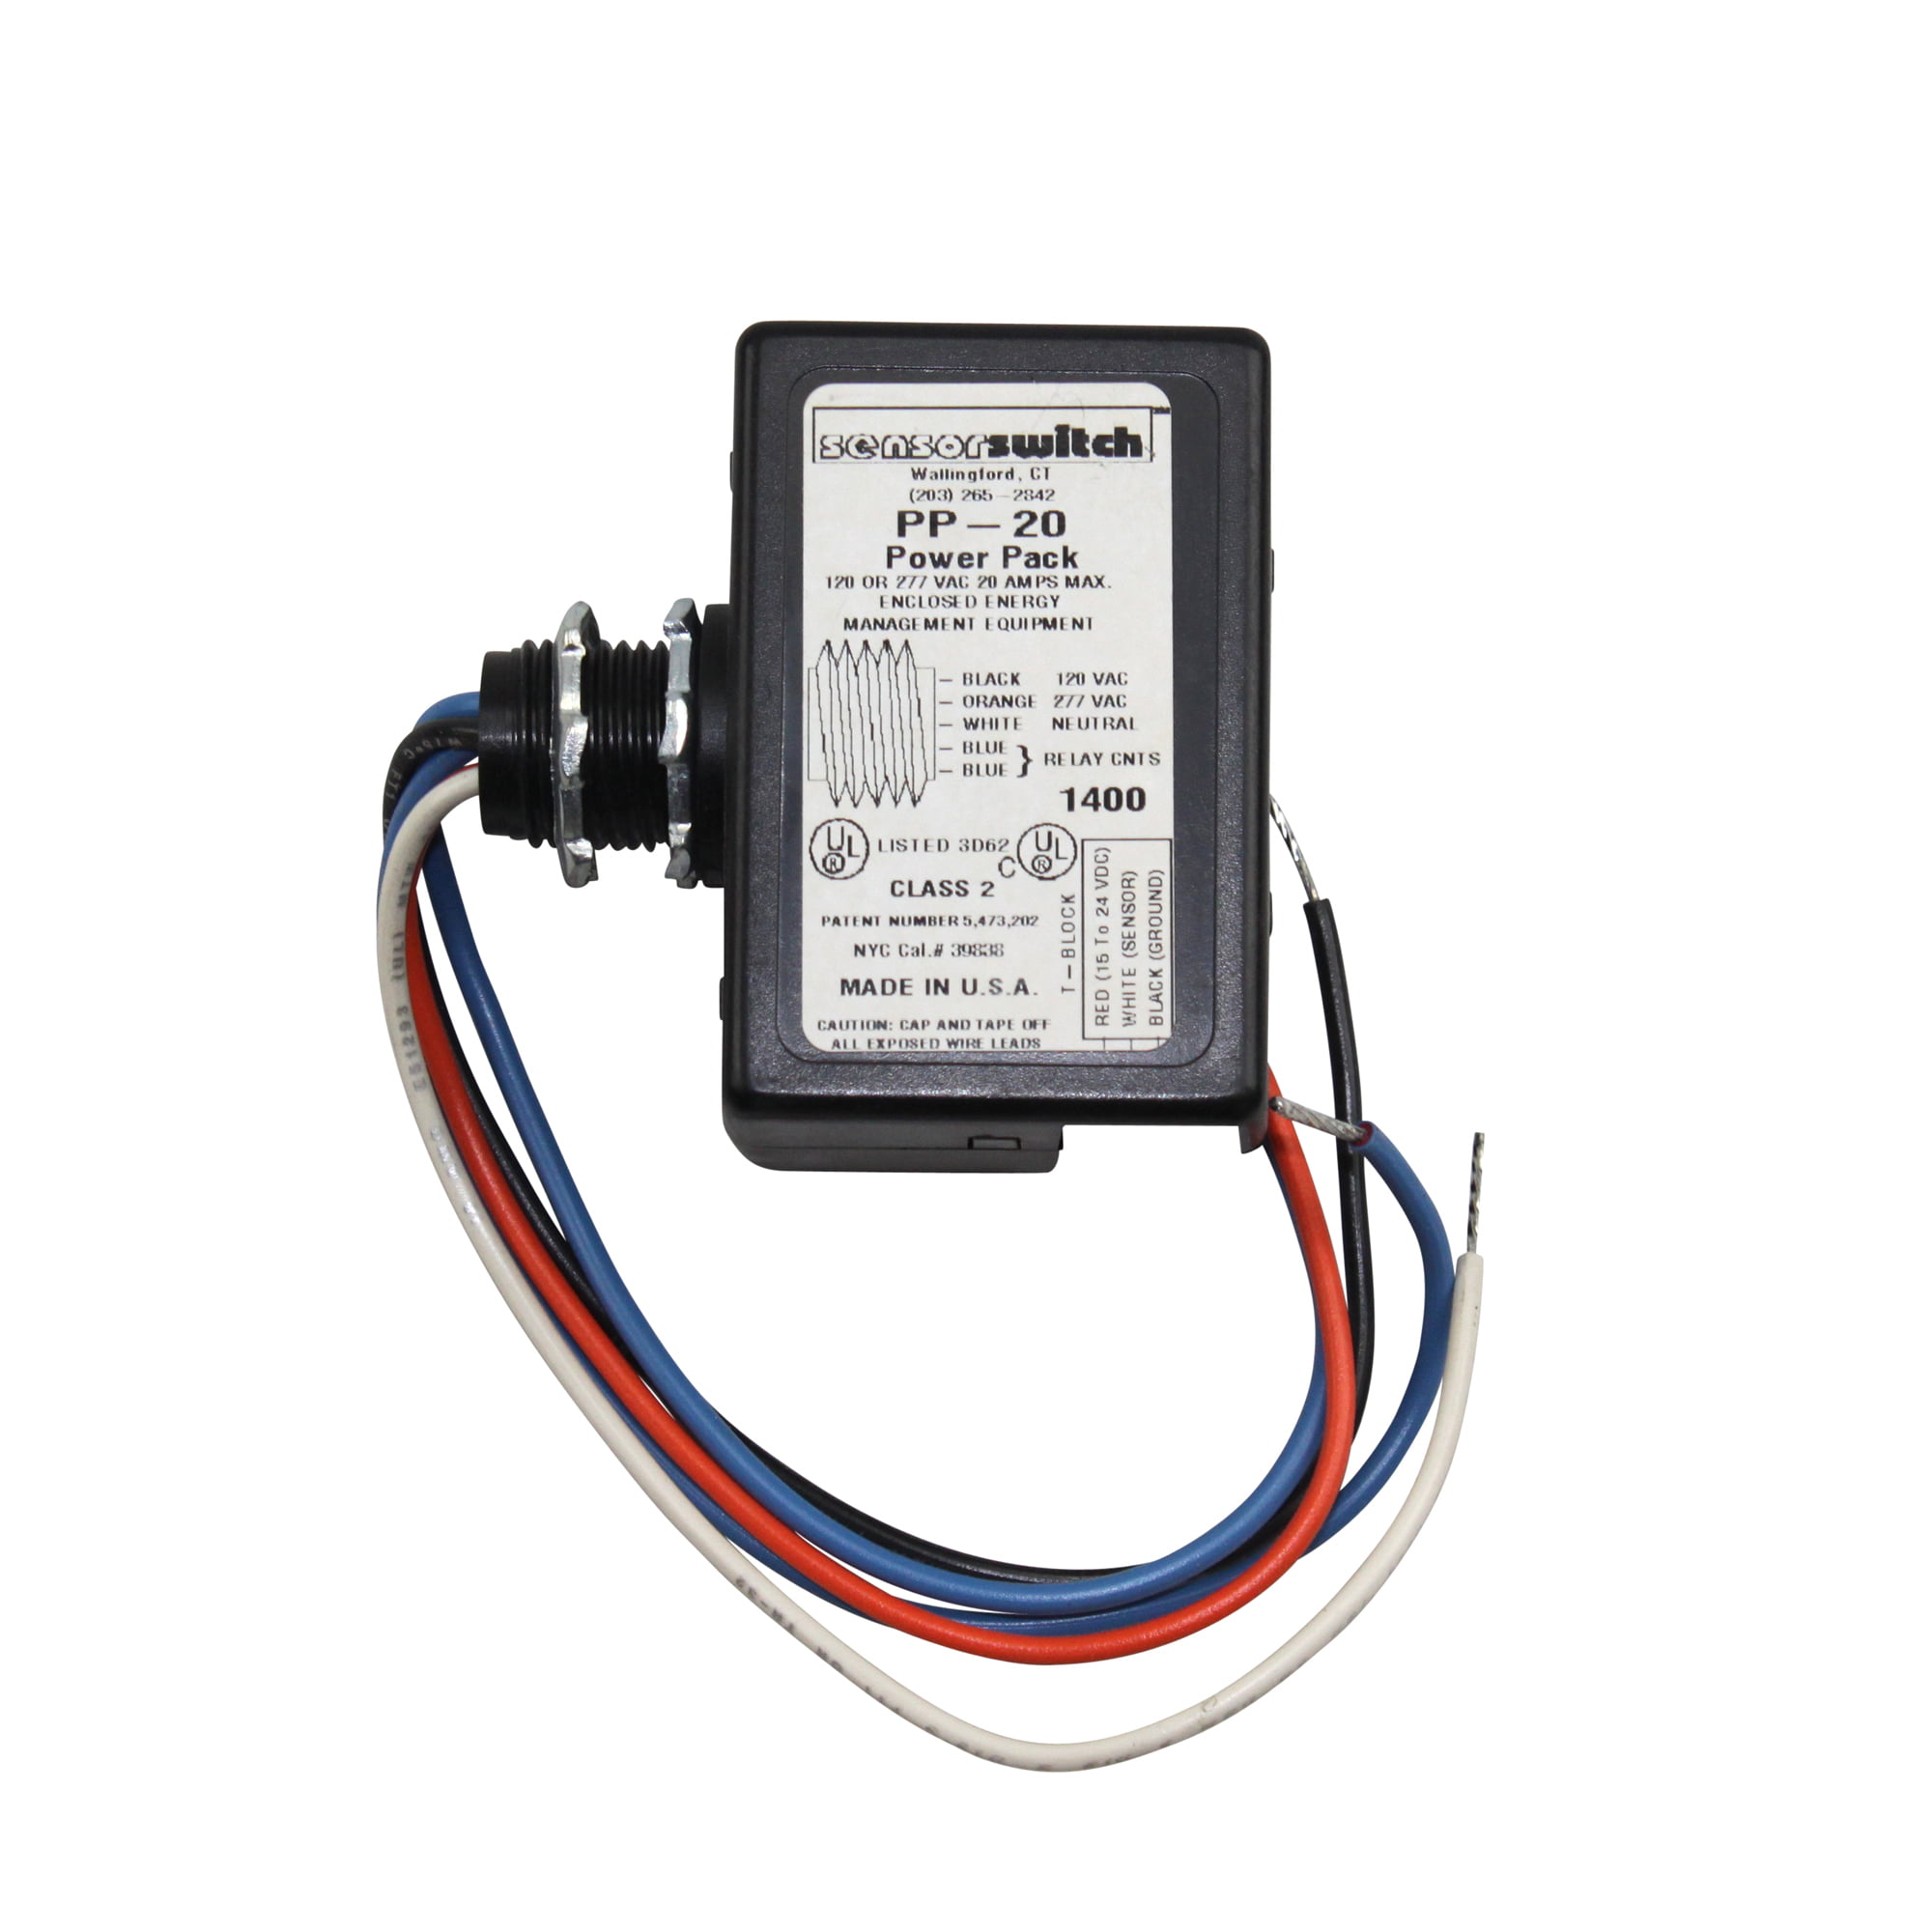 Relay Circuit Model PP20 for sale online Sensor Switch Power Pack